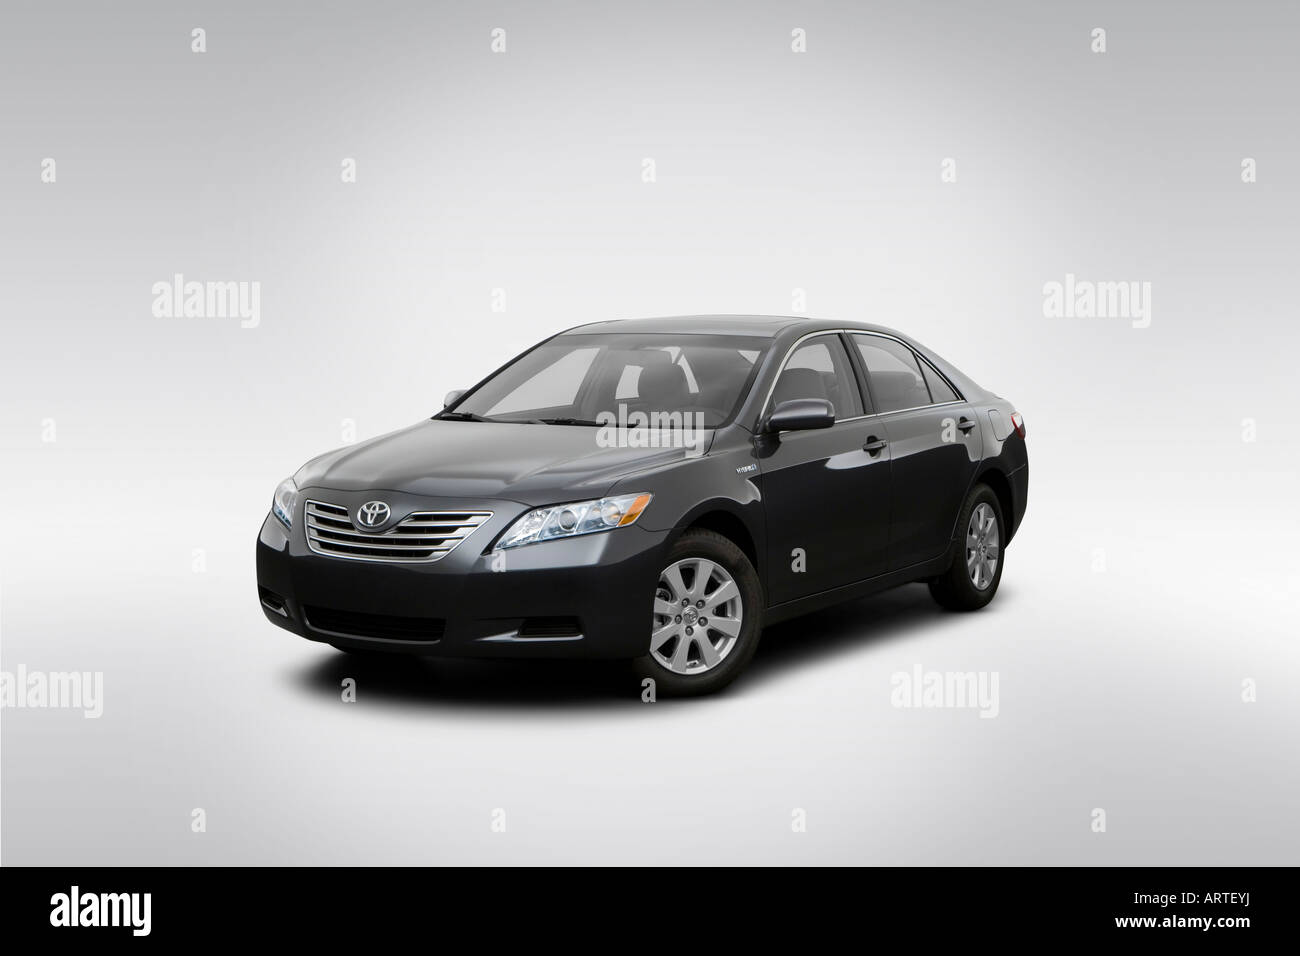 2008 Toyota Camry Hybrid in Gray - Front angle view Stock Photo